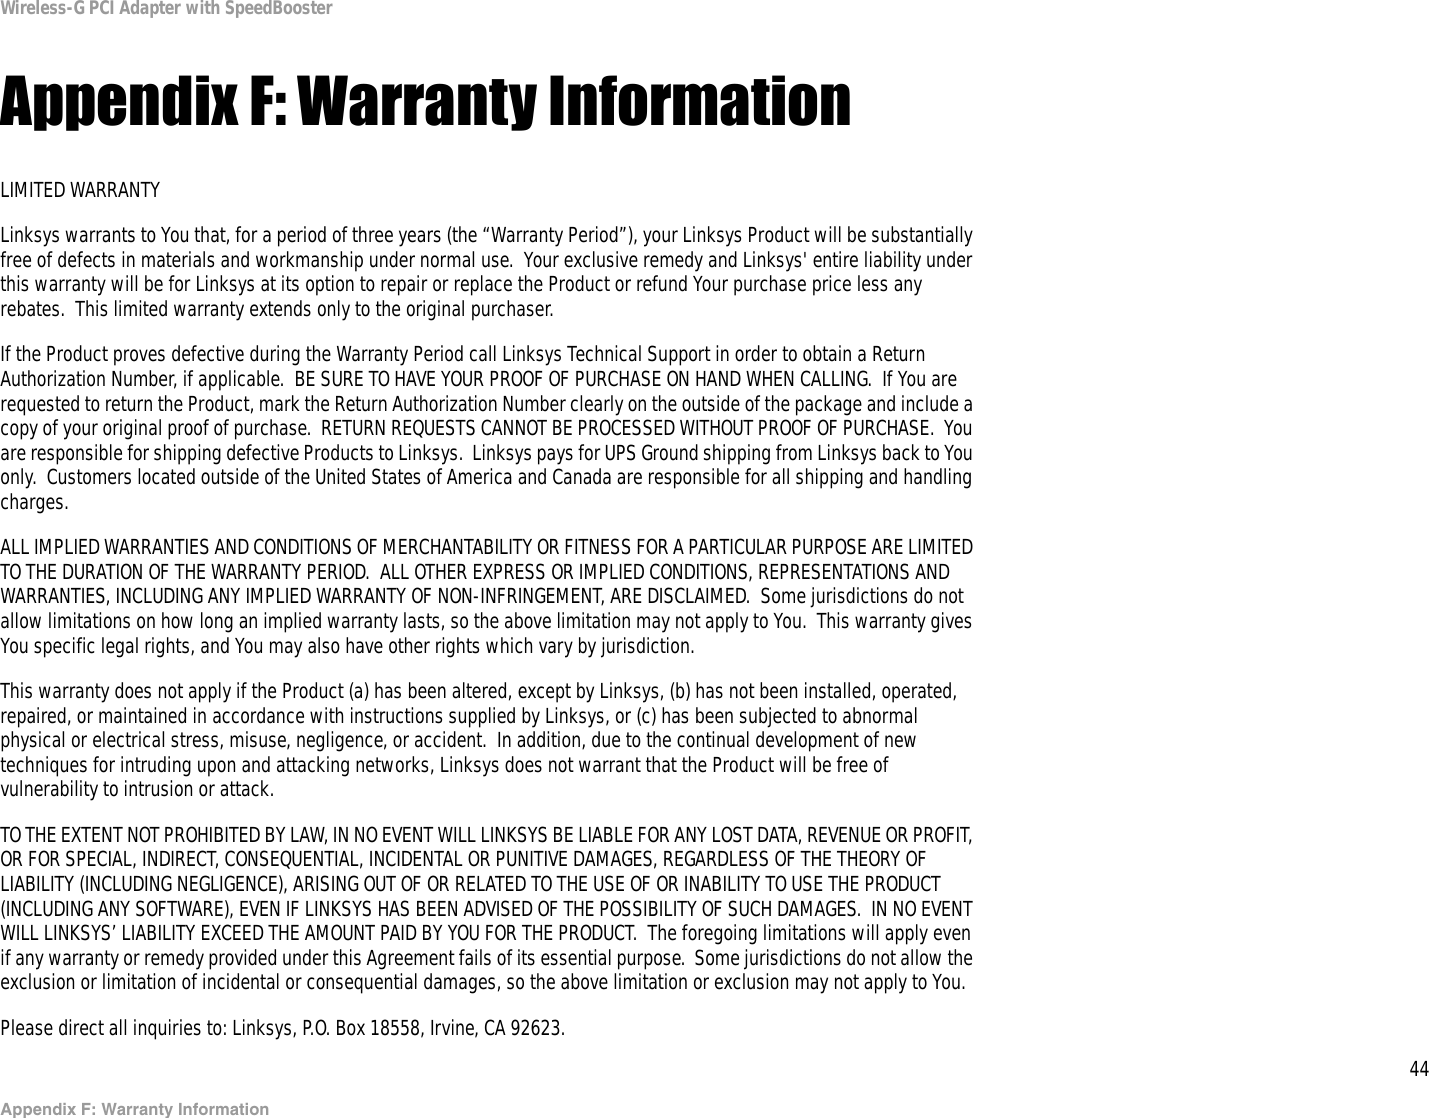 44Appendix F: Warranty InformationWireless-G PCI Adapter with SpeedBoosterAppendix F: Warranty InformationLIMITED WARRANTYLinksys warrants to You that, for a period of three years (the “Warranty Period”), your Linksys Product will be substantially free of defects in materials and workmanship under normal use.  Your exclusive remedy and Linksys&apos; entire liability under this warranty will be for Linksys at its option to repair or replace the Product or refund Your purchase price less any rebates.  This limited warranty extends only to the original purchaser.  If the Product proves defective during the Warranty Period call Linksys Technical Support in order to obtain a Return Authorization Number, if applicable.  BE SURE TO HAVE YOUR PROOF OF PURCHASE ON HAND WHEN CALLING.  If You are requested to return the Product, mark the Return Authorization Number clearly on the outside of the package and include a copy of your original proof of purchase.  RETURN REQUESTS CANNOT BE PROCESSED WITHOUT PROOF OF PURCHASE.  You are responsible for shipping defective Products to Linksys.  Linksys pays for UPS Ground shipping from Linksys back to You only.  Customers located outside of the United States of America and Canada are responsible for all shipping and handling charges. ALL IMPLIED WARRANTIES AND CONDITIONS OF MERCHANTABILITY OR FITNESS FOR A PARTICULAR PURPOSE ARE LIMITED TO THE DURATION OF THE WARRANTY PERIOD.  ALL OTHER EXPRESS OR IMPLIED CONDITIONS, REPRESENTATIONS AND WARRANTIES, INCLUDING ANY IMPLIED WARRANTY OF NON-INFRINGEMENT, ARE DISCLAIMED.  Some jurisdictions do not allow limitations on how long an implied warranty lasts, so the above limitation may not apply to You.  This warranty gives You specific legal rights, and You may also have other rights which vary by jurisdiction.This warranty does not apply if the Product (a) has been altered, except by Linksys, (b) has not been installed, operated, repaired, or maintained in accordance with instructions supplied by Linksys, or (c) has been subjected to abnormal physical or electrical stress, misuse, negligence, or accident.  In addition, due to the continual development of new techniques for intruding upon and attacking networks, Linksys does not warrant that the Product will be free of vulnerability to intrusion or attack.TO THE EXTENT NOT PROHIBITED BY LAW, IN NO EVENT WILL LINKSYS BE LIABLE FOR ANY LOST DATA, REVENUE OR PROFIT, OR FOR SPECIAL, INDIRECT, CONSEQUENTIAL, INCIDENTAL OR PUNITIVE DAMAGES, REGARDLESS OF THE THEORY OF LIABILITY (INCLUDING NEGLIGENCE), ARISING OUT OF OR RELATED TO THE USE OF OR INABILITY TO USE THE PRODUCT (INCLUDING ANY SOFTWARE), EVEN IF LINKSYS HAS BEEN ADVISED OF THE POSSIBILITY OF SUCH DAMAGES.  IN NO EVENT WILL LINKSYS’ LIABILITY EXCEED THE AMOUNT PAID BY YOU FOR THE PRODUCT.  The foregoing limitations will apply even if any warranty or remedy provided under this Agreement fails of its essential purpose.  Some jurisdictions do not allow the exclusion or limitation of incidental or consequential damages, so the above limitation or exclusion may not apply to You.Please direct all inquiries to: Linksys, P.O. Box 18558, Irvine, CA 92623.